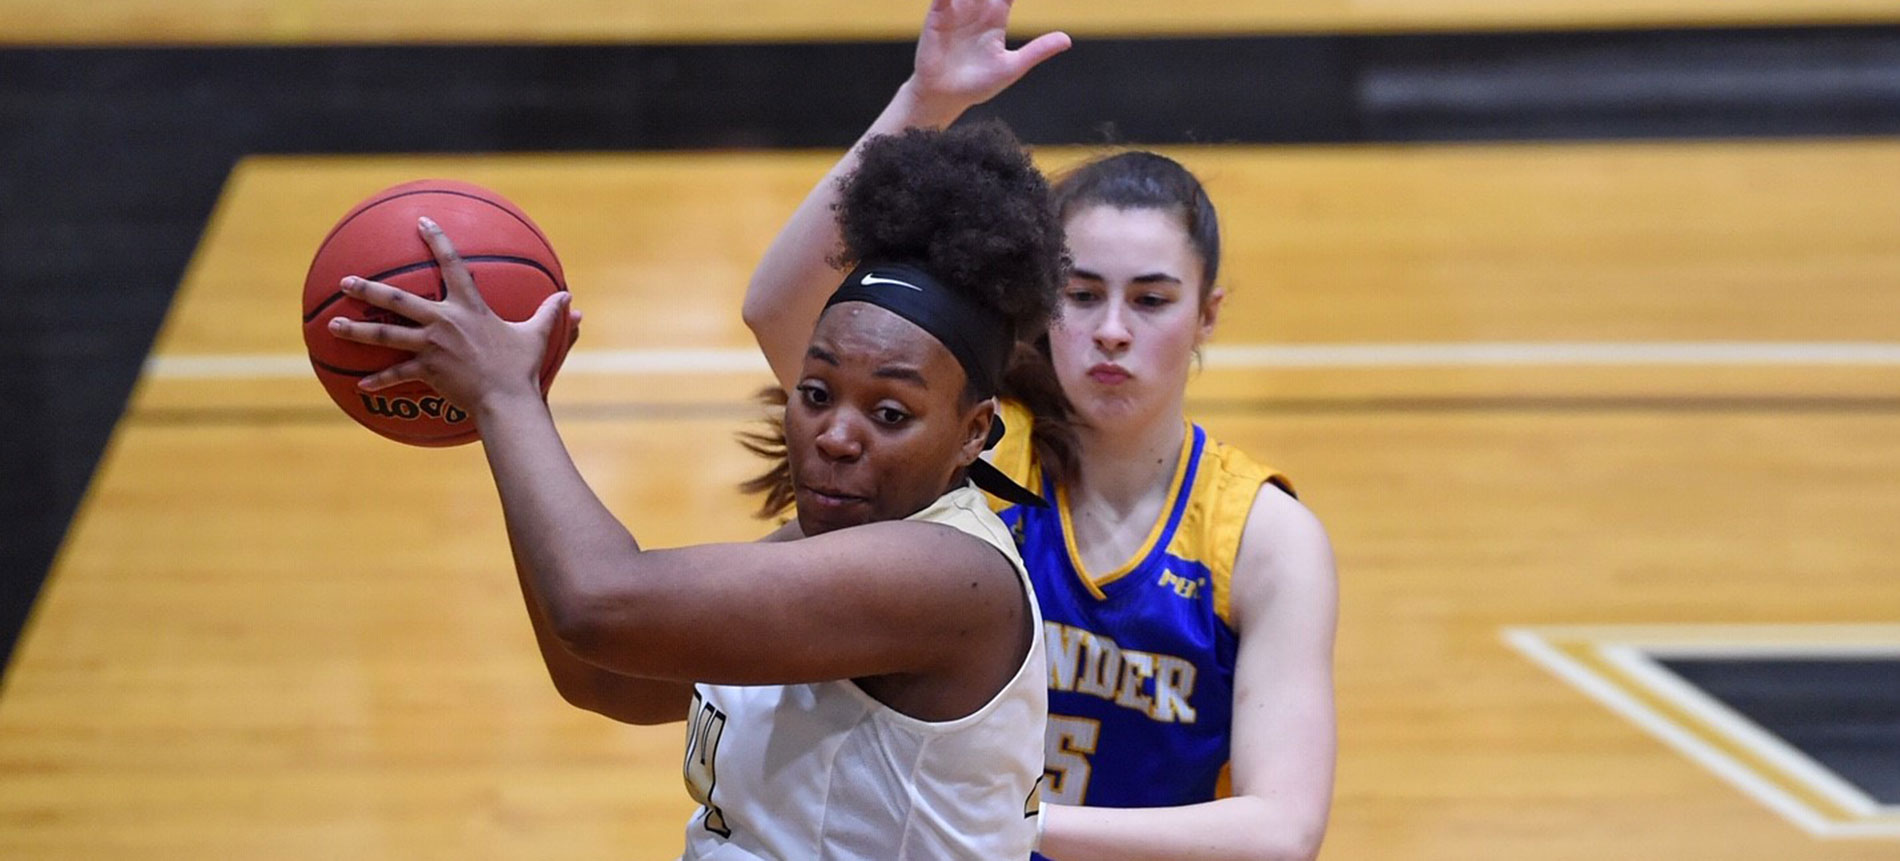 Fifth-Seeded Lander Heads to Sweet 16 by Upending No. 1 Seed Anderson in Semifinals of NCAA Women’s Basketball Southeast Region Tournament